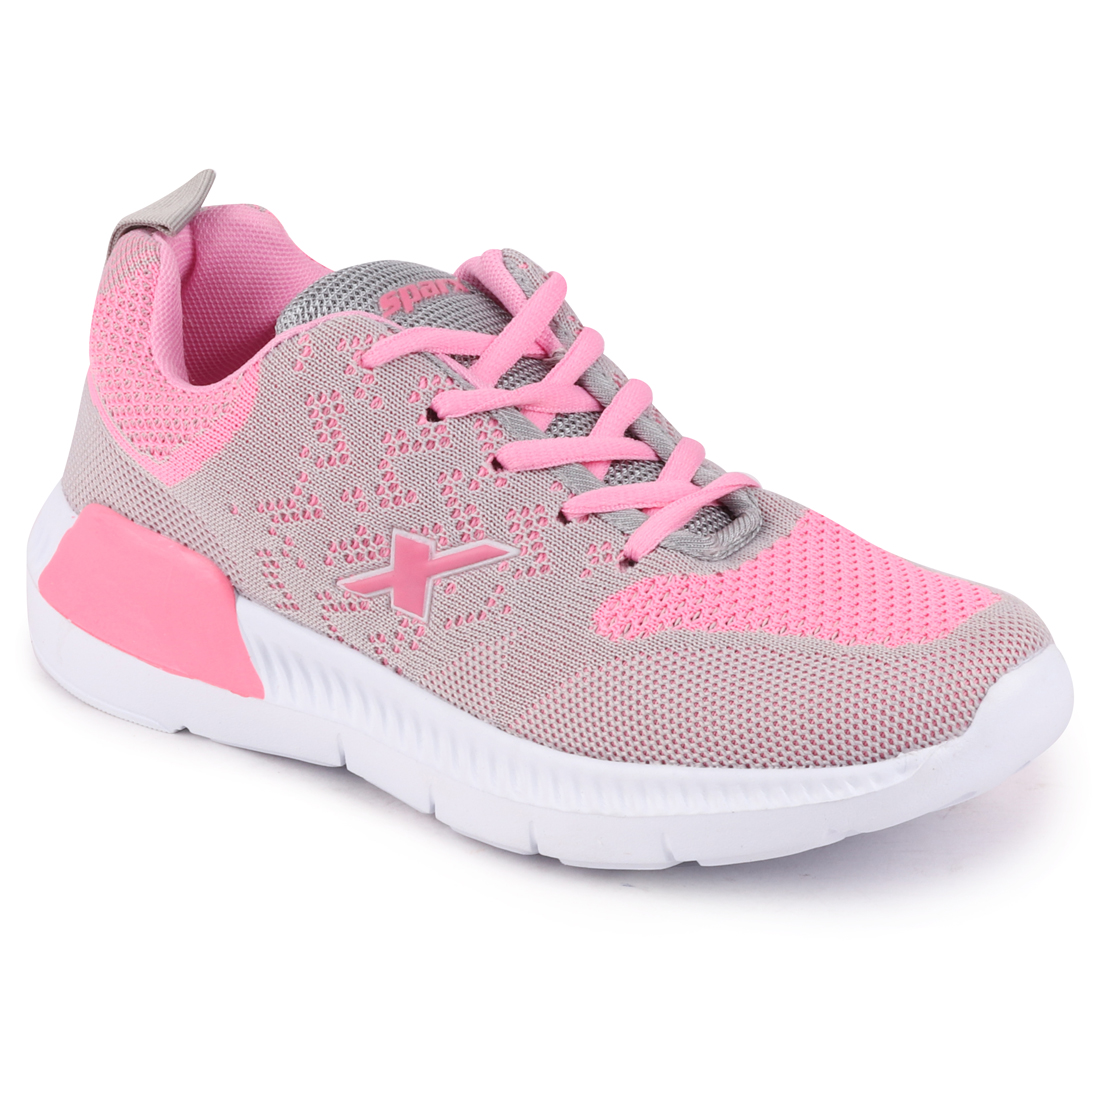 Buy Sparx Women Grey Pink Running Shoes Online @ ₹799 from ShopClues